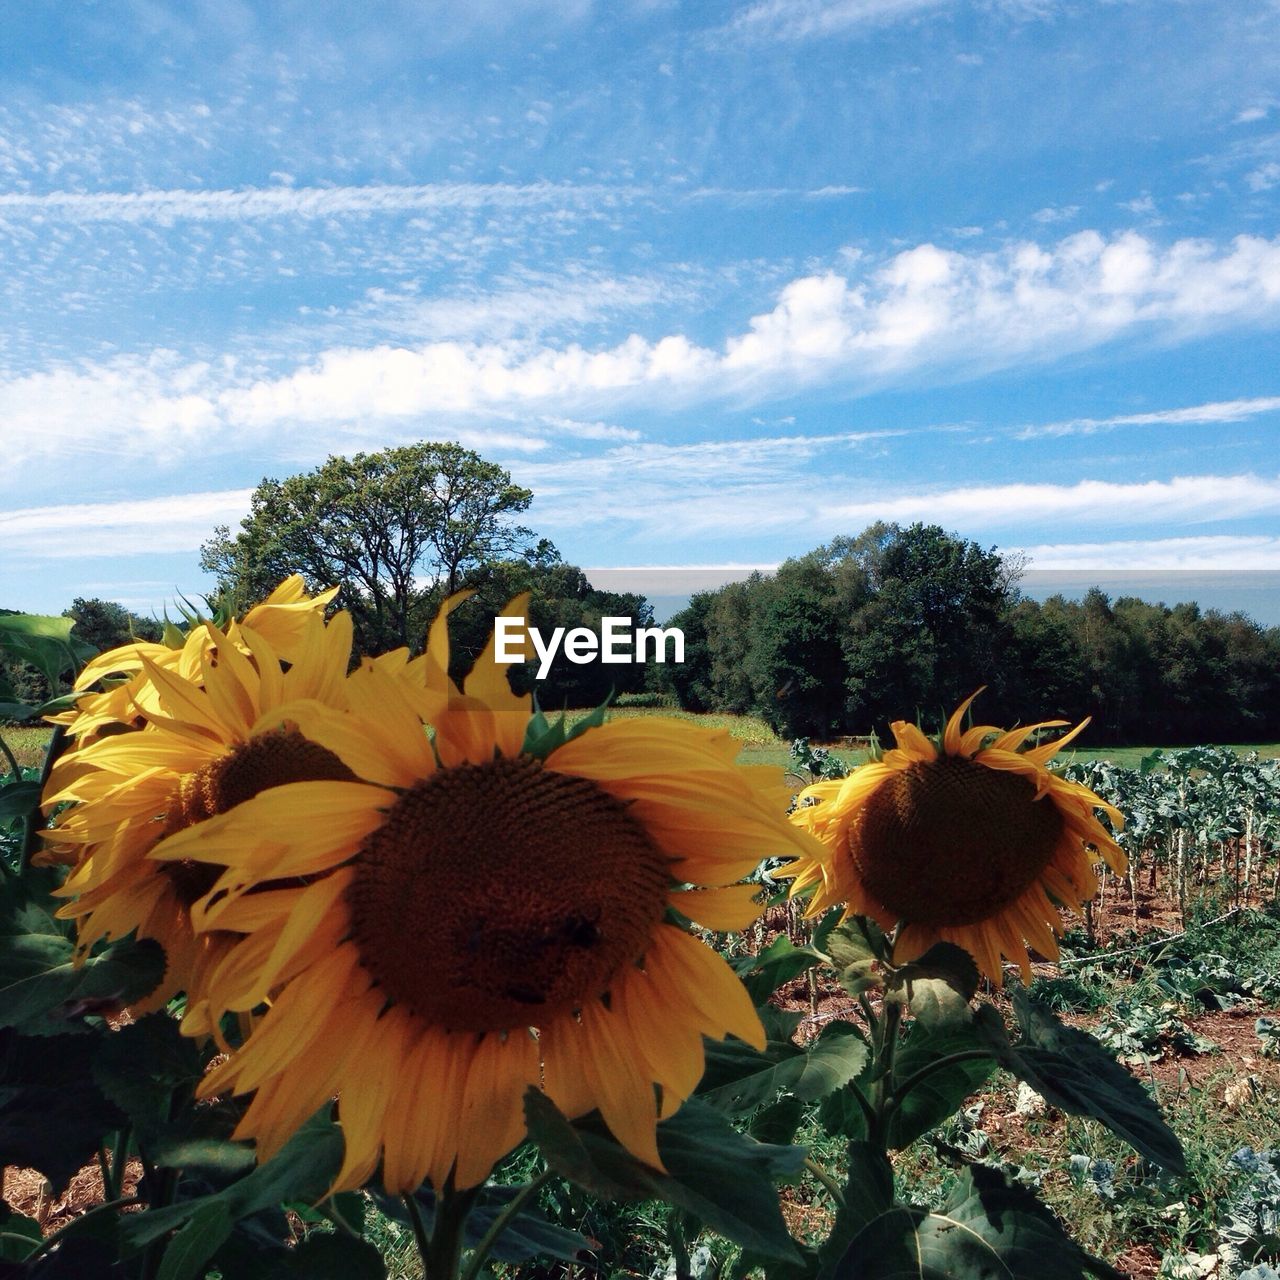 CLOSE-UP OF SUNFLOWER IN FIELD